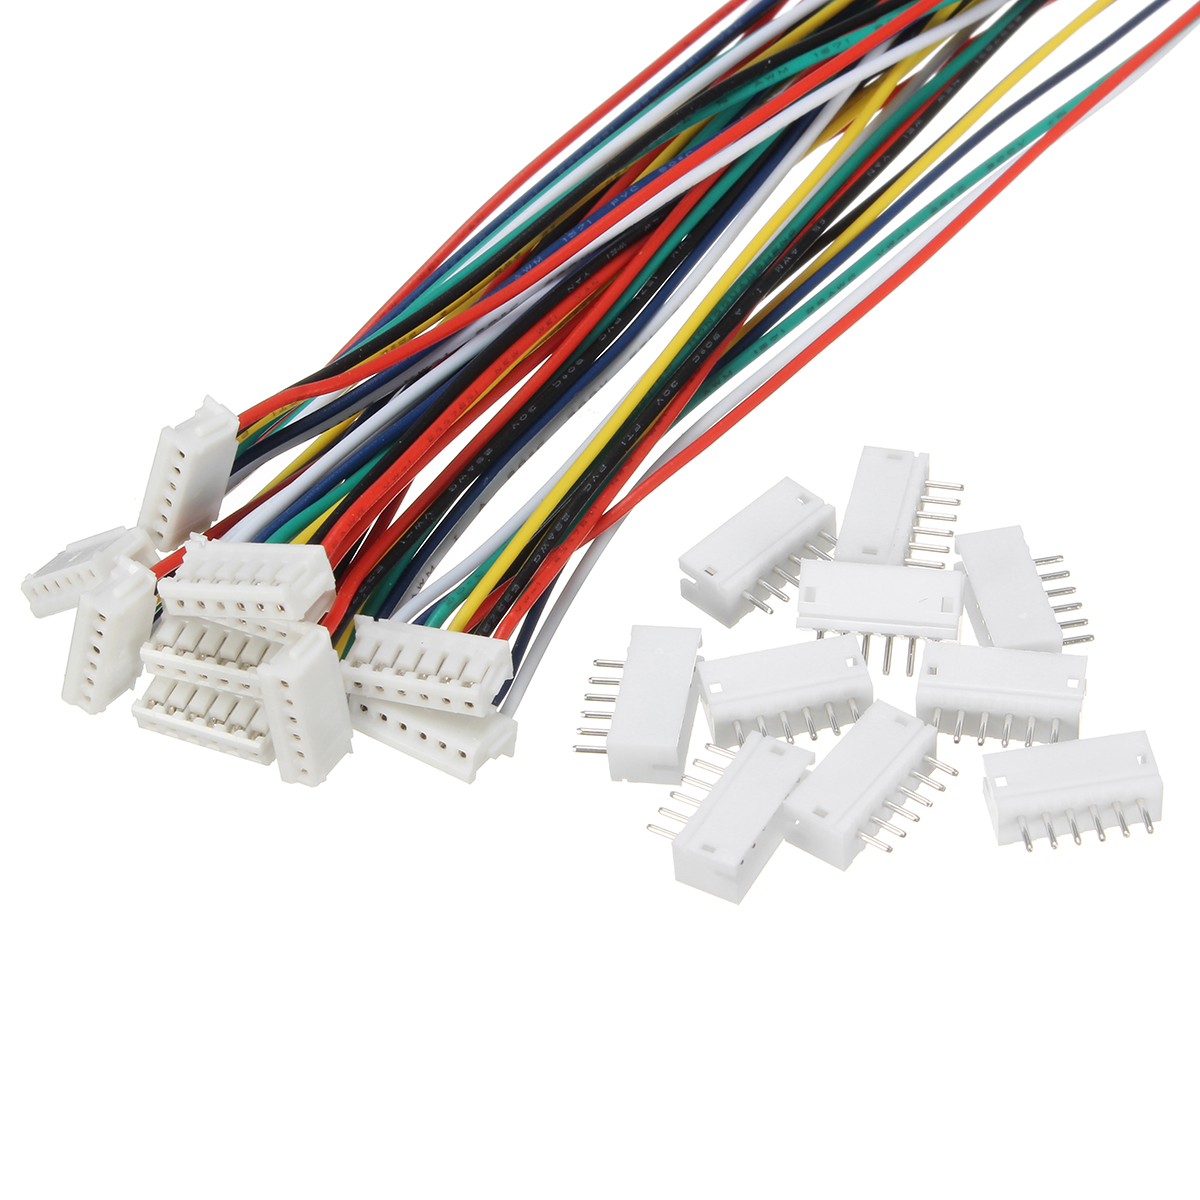 10 Sets Mini Micro JST 1.5mm ZH 4-Pin Connector Plug avec Wires Cables 150mm ILS 